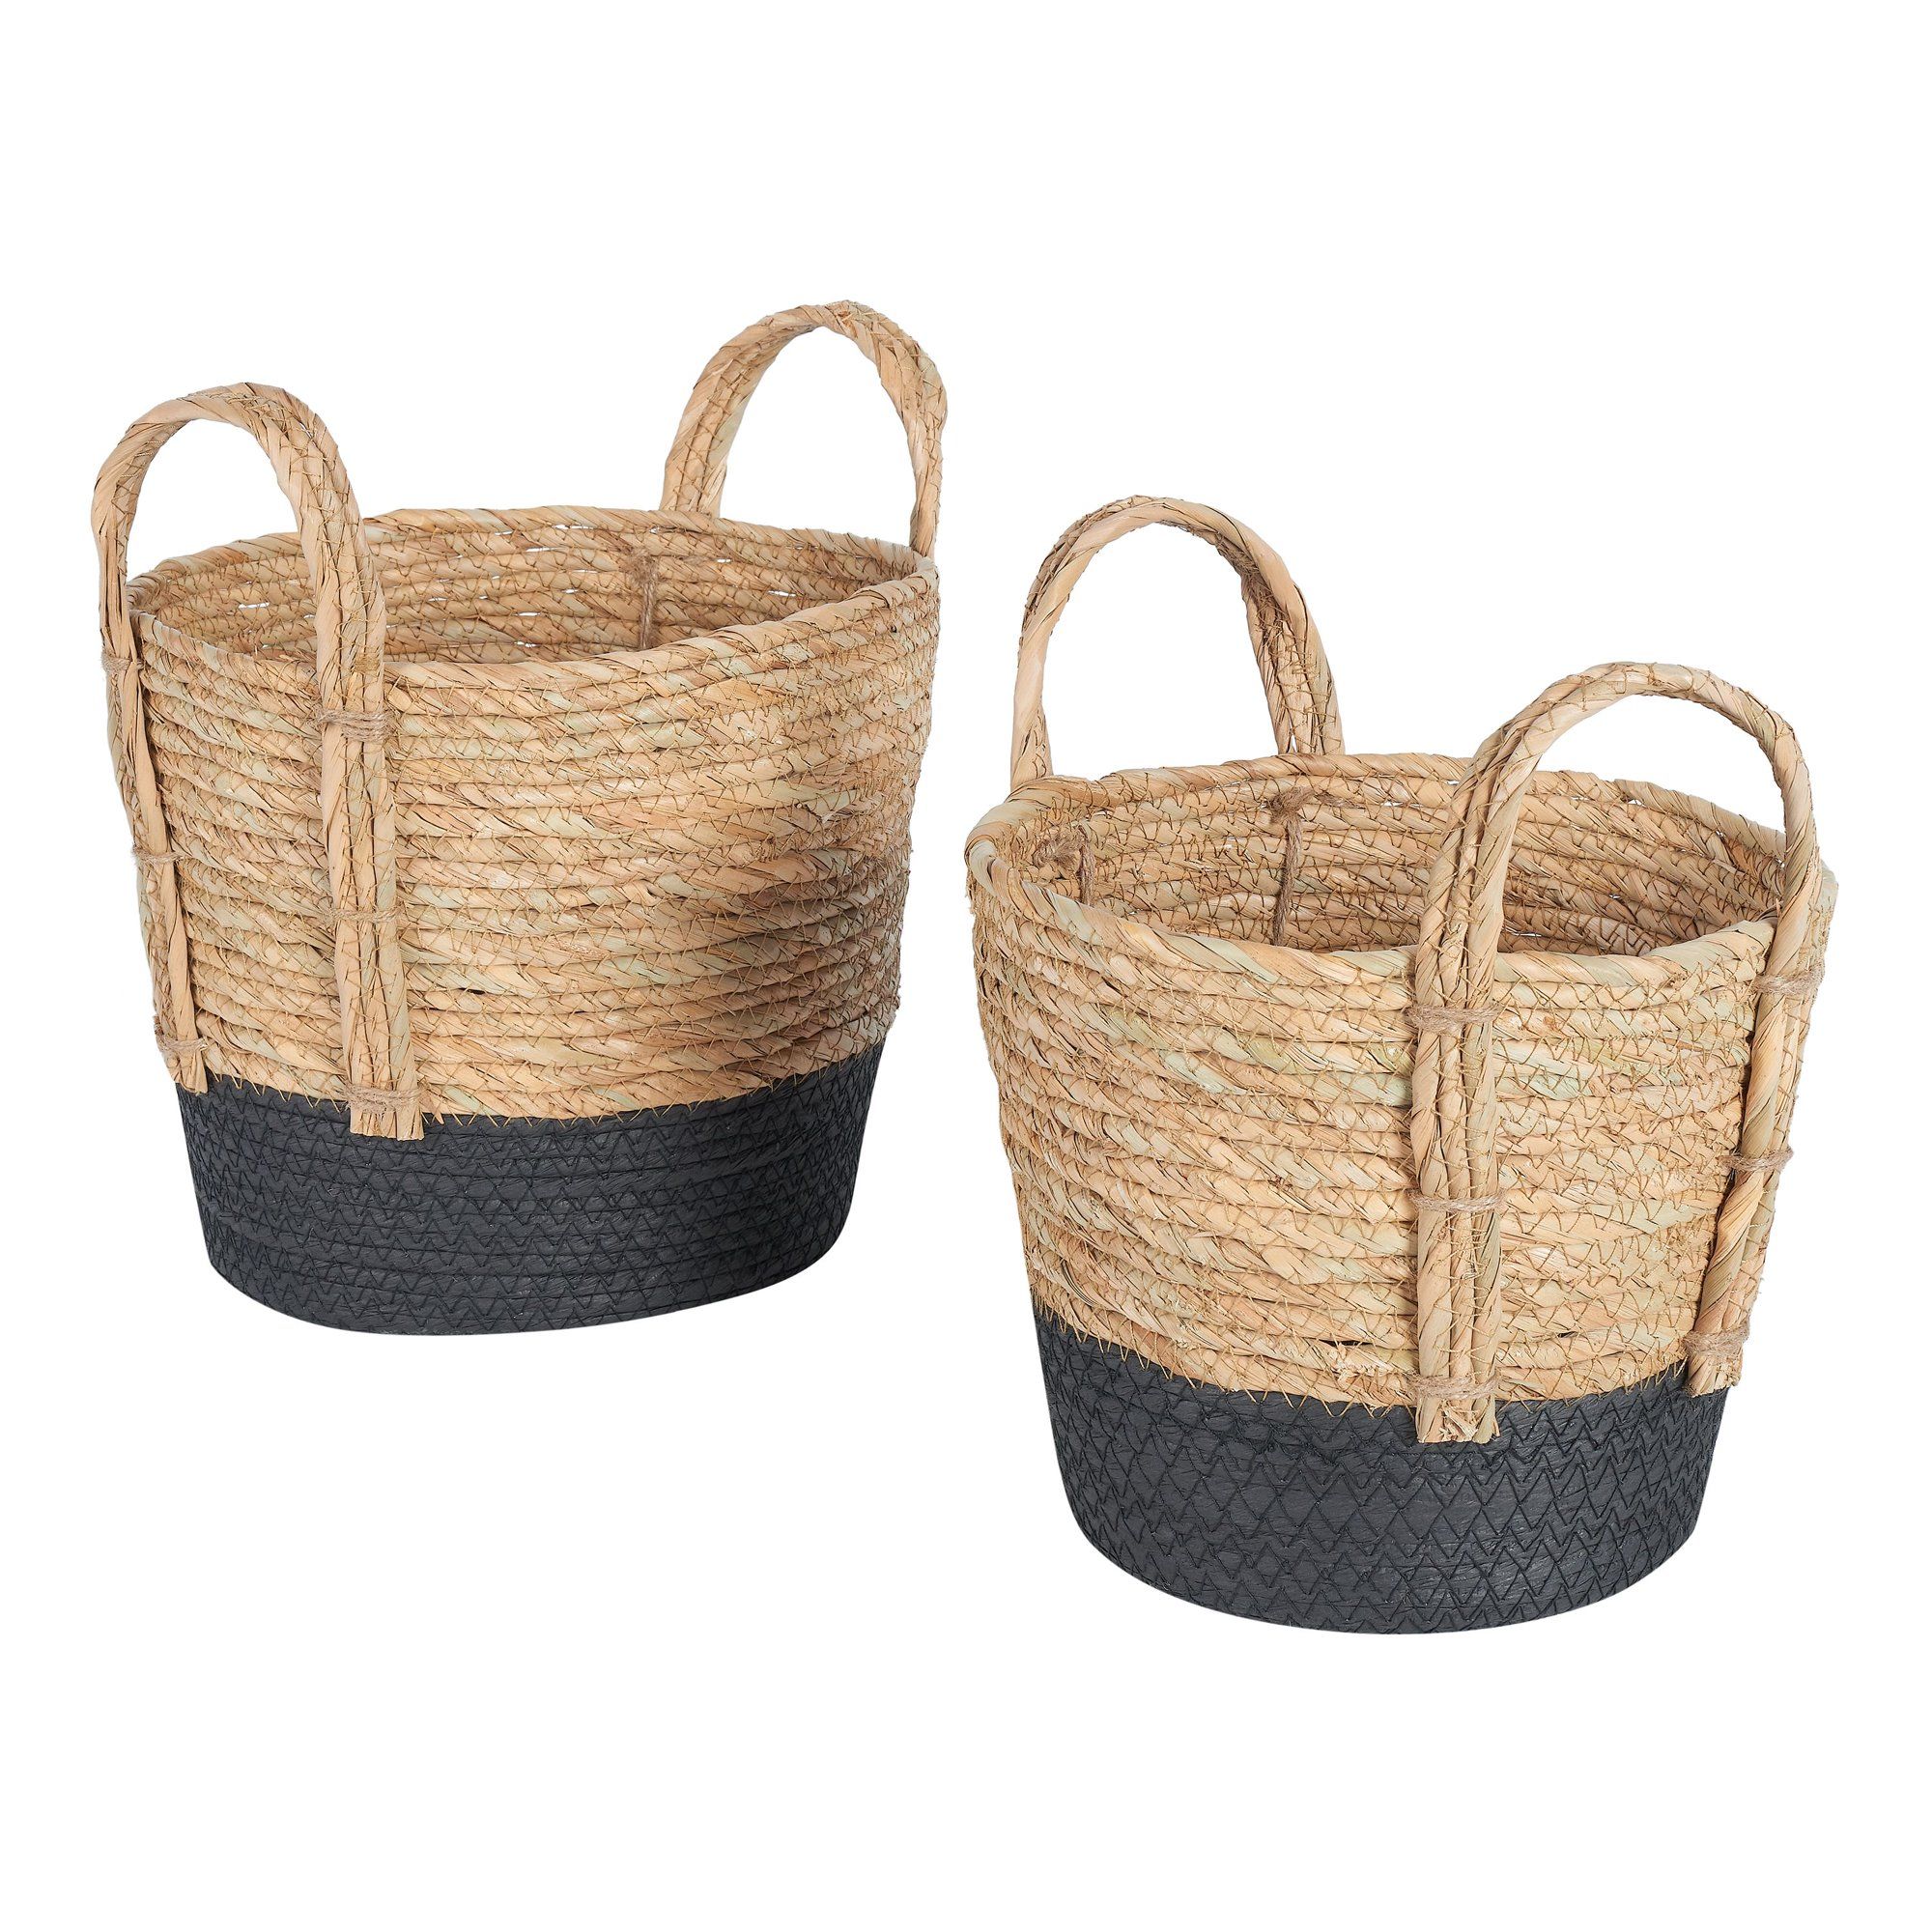 Mainstays Natural Seagrass & Paper Rope Baskets, Set of 2, Small and Medium | Walmart (US)